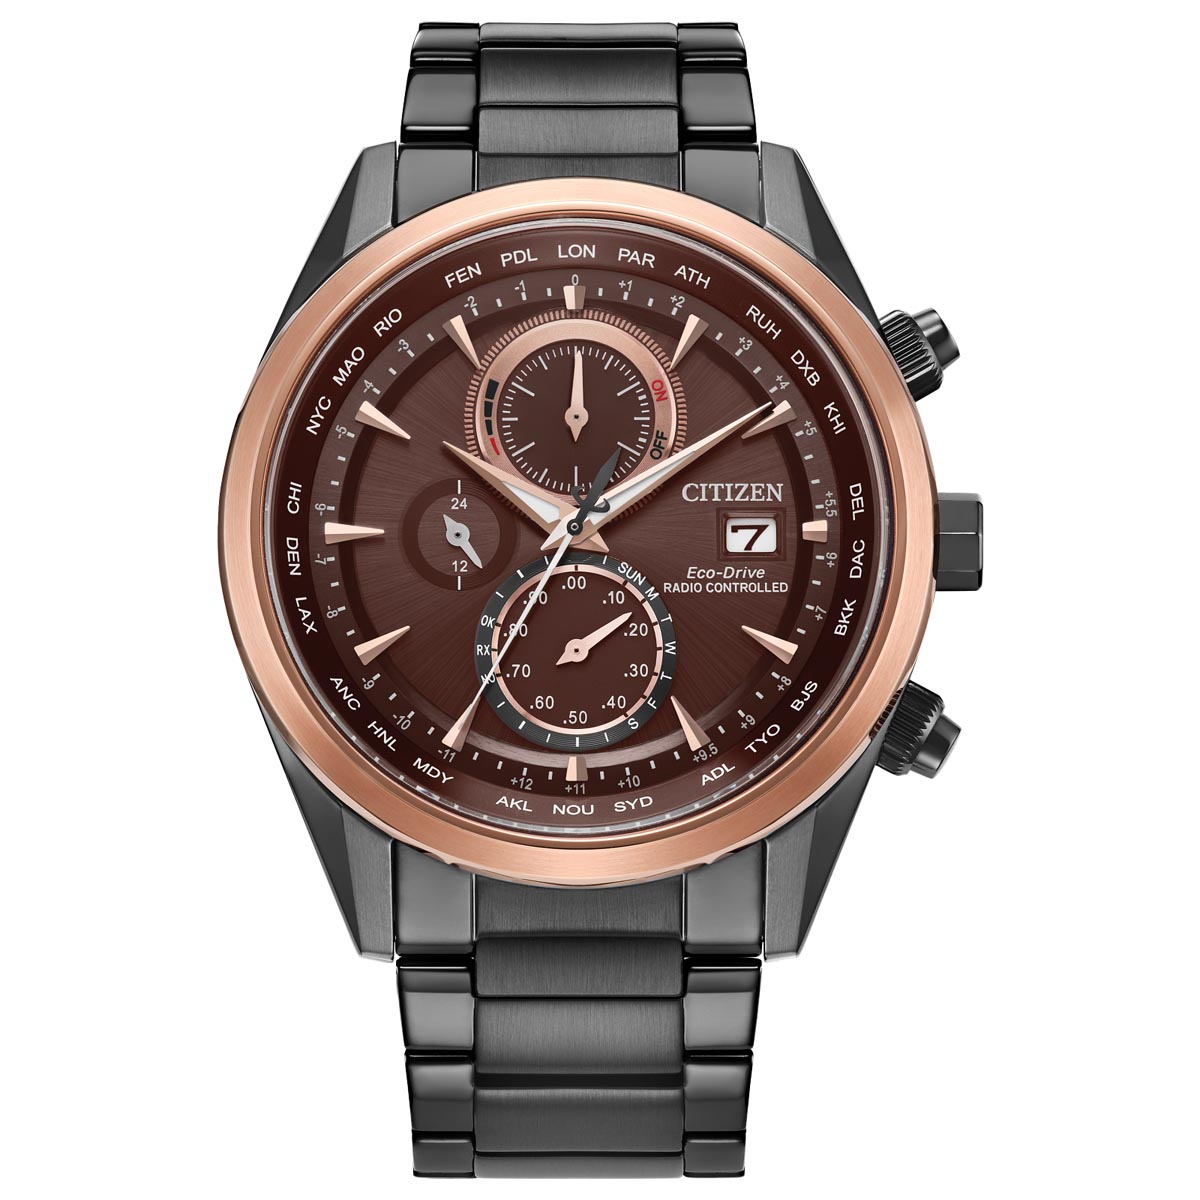 Citizen Sport Luxury Mens Watch with Burgundy Dial and Black Stainless Steel Bracelet (eco drive movement)